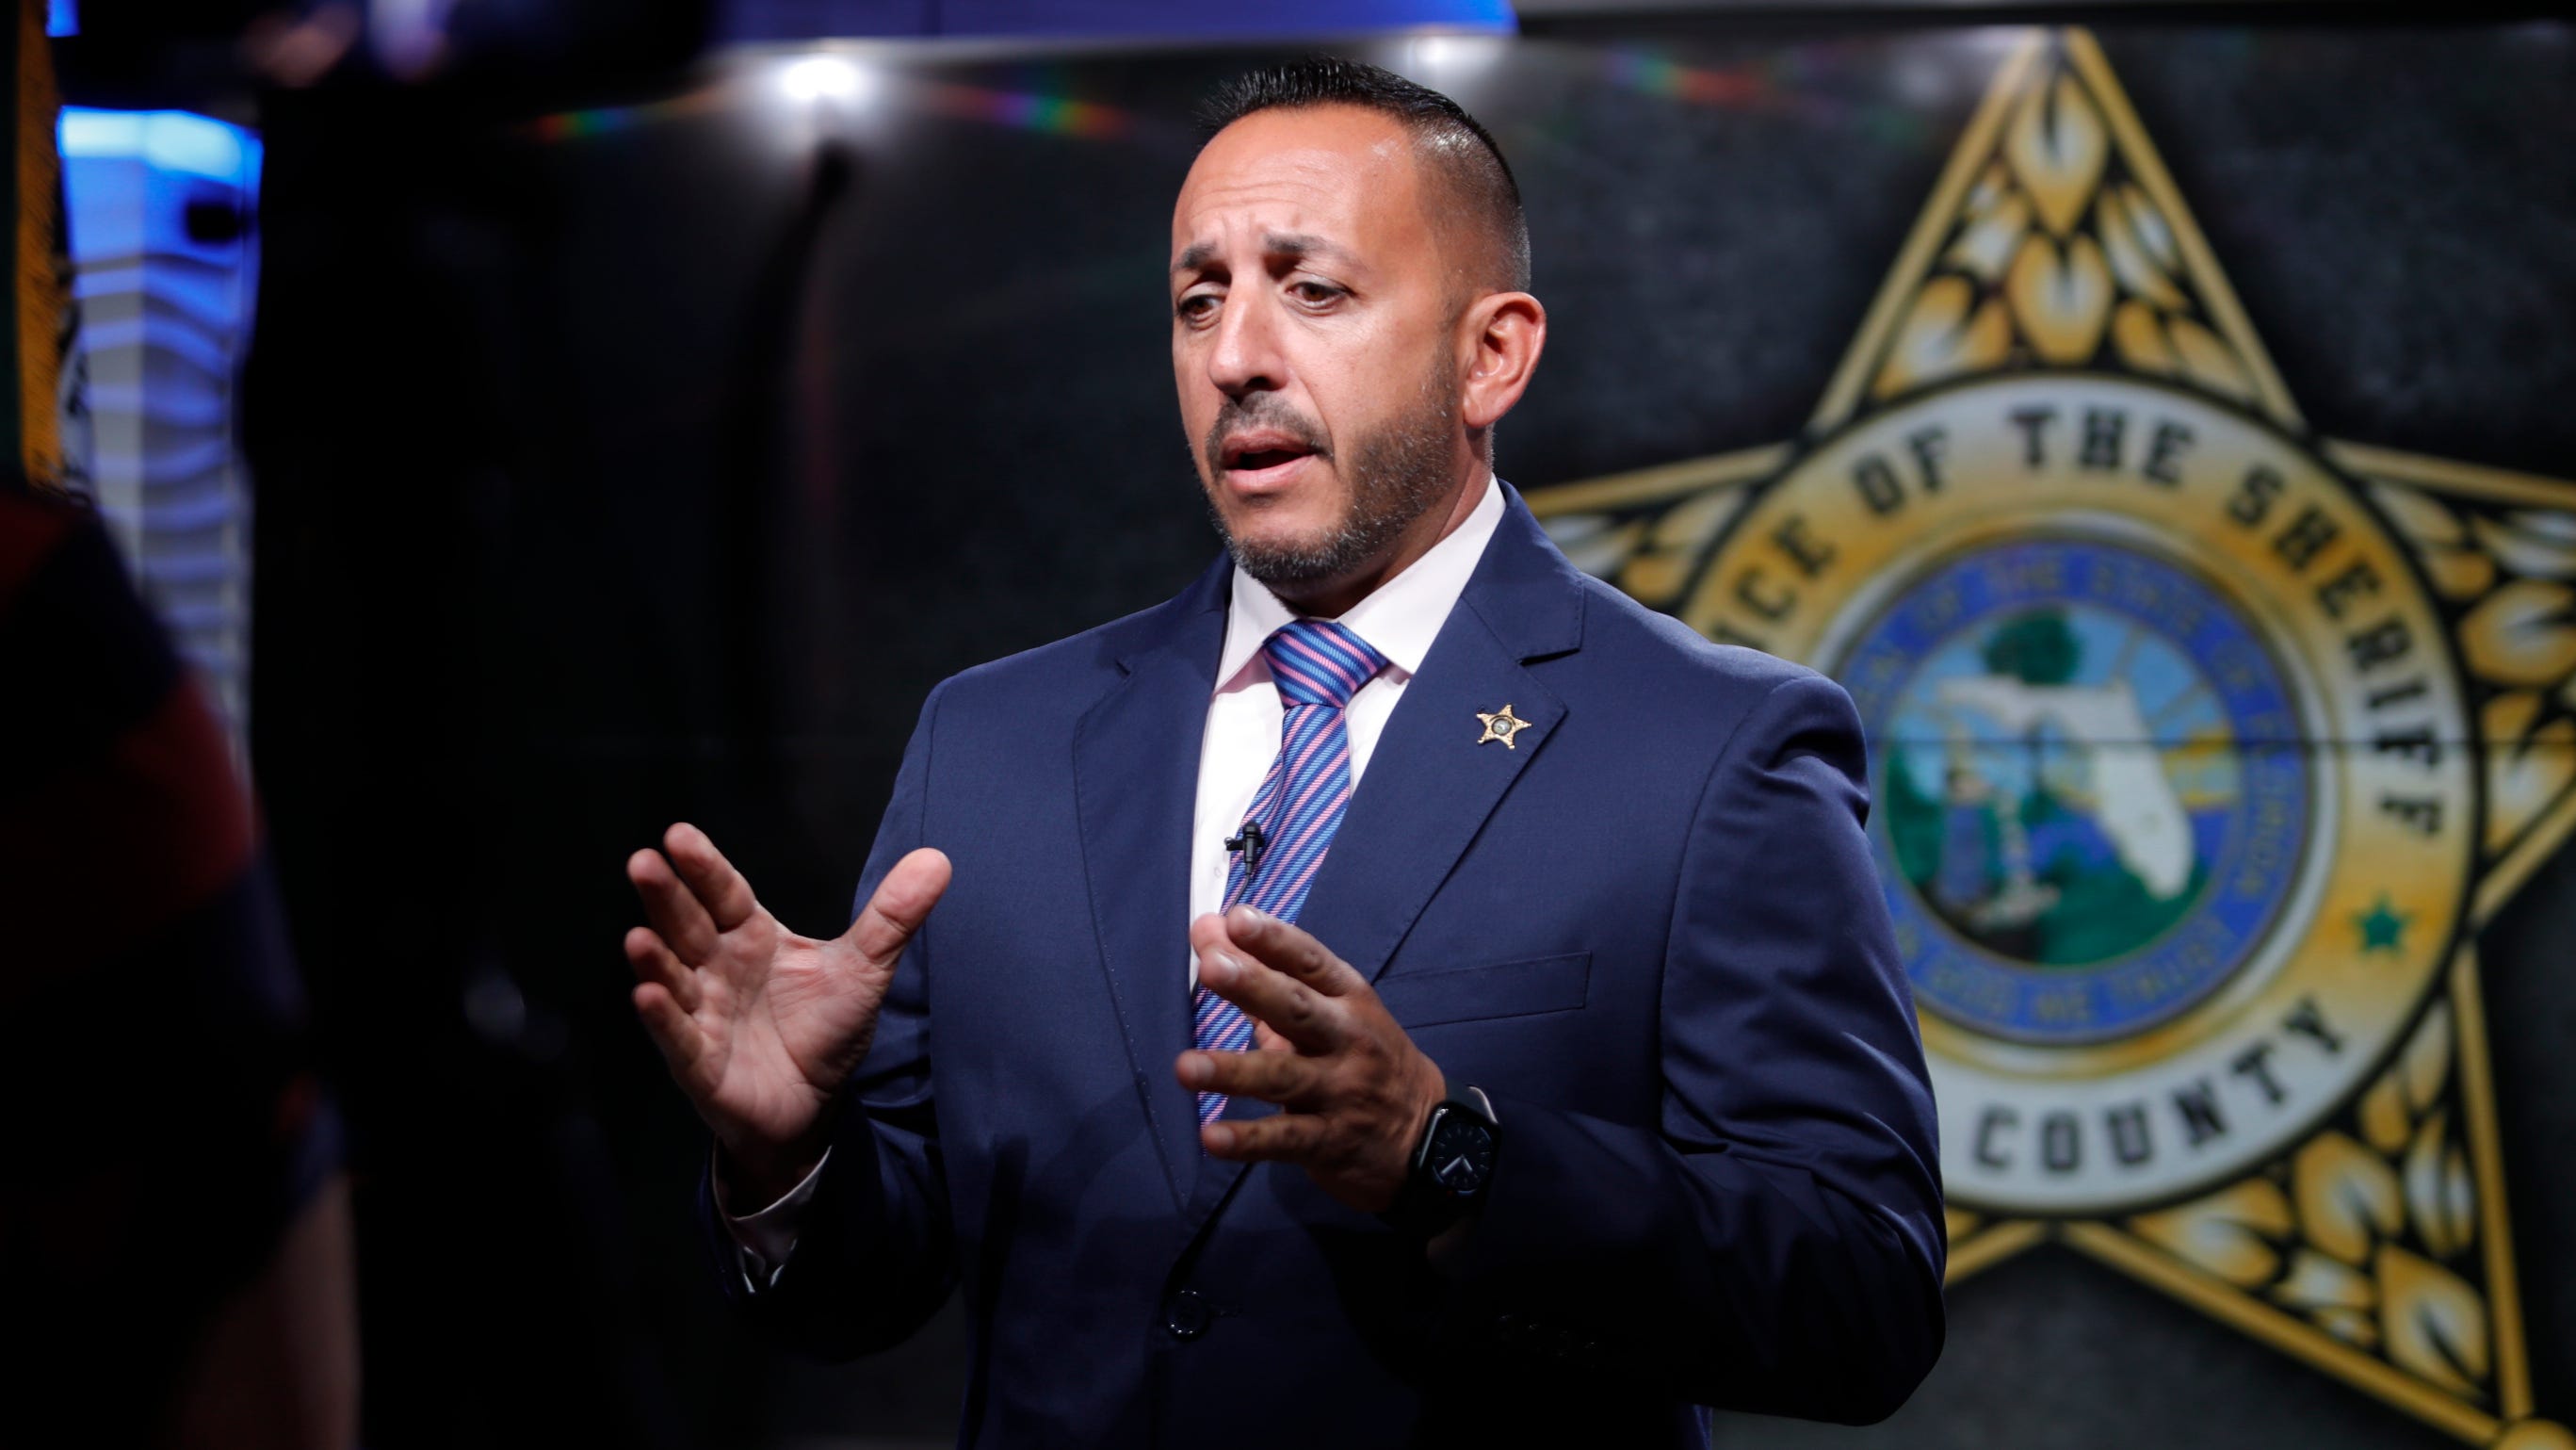 Sheriff Marceno addresses death row inmate's connection to Lee County